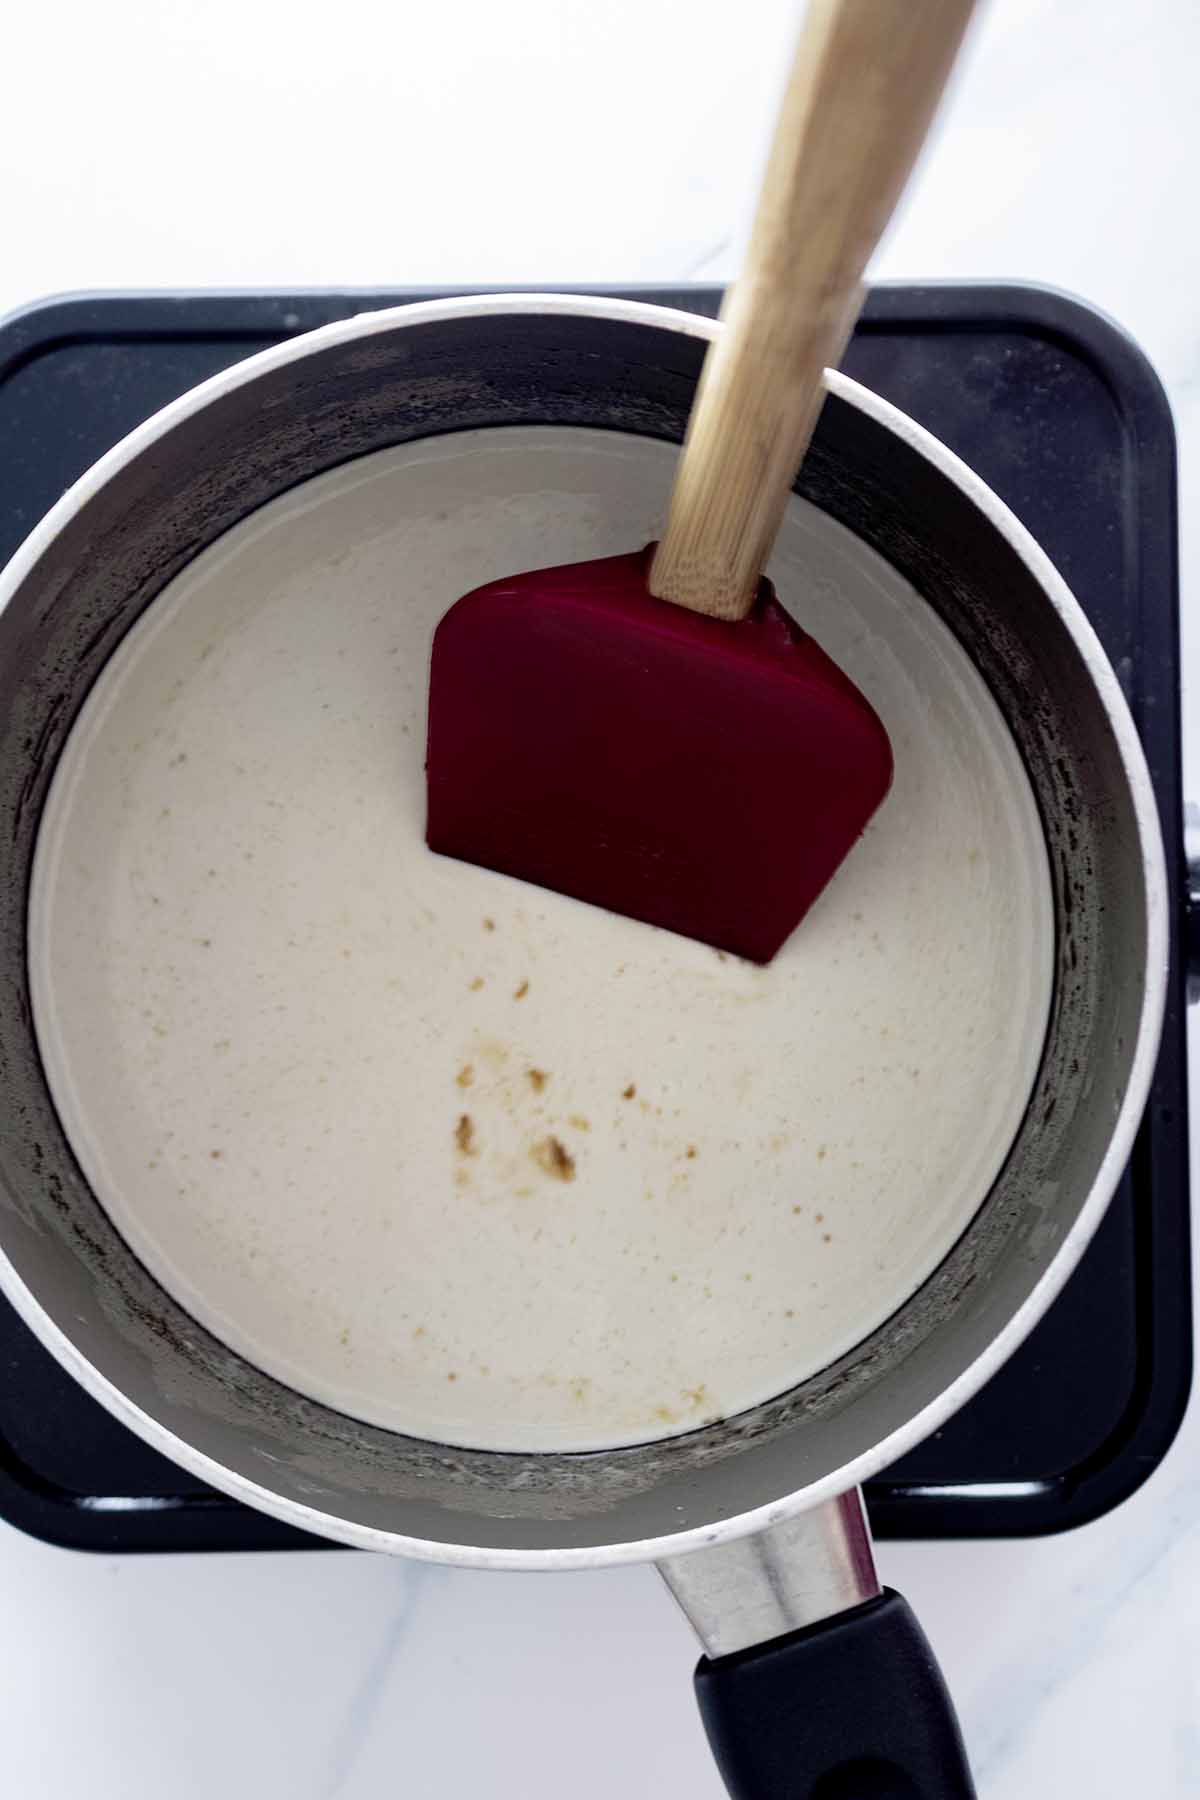 Heavy cream in a saucepan with a red spatula.